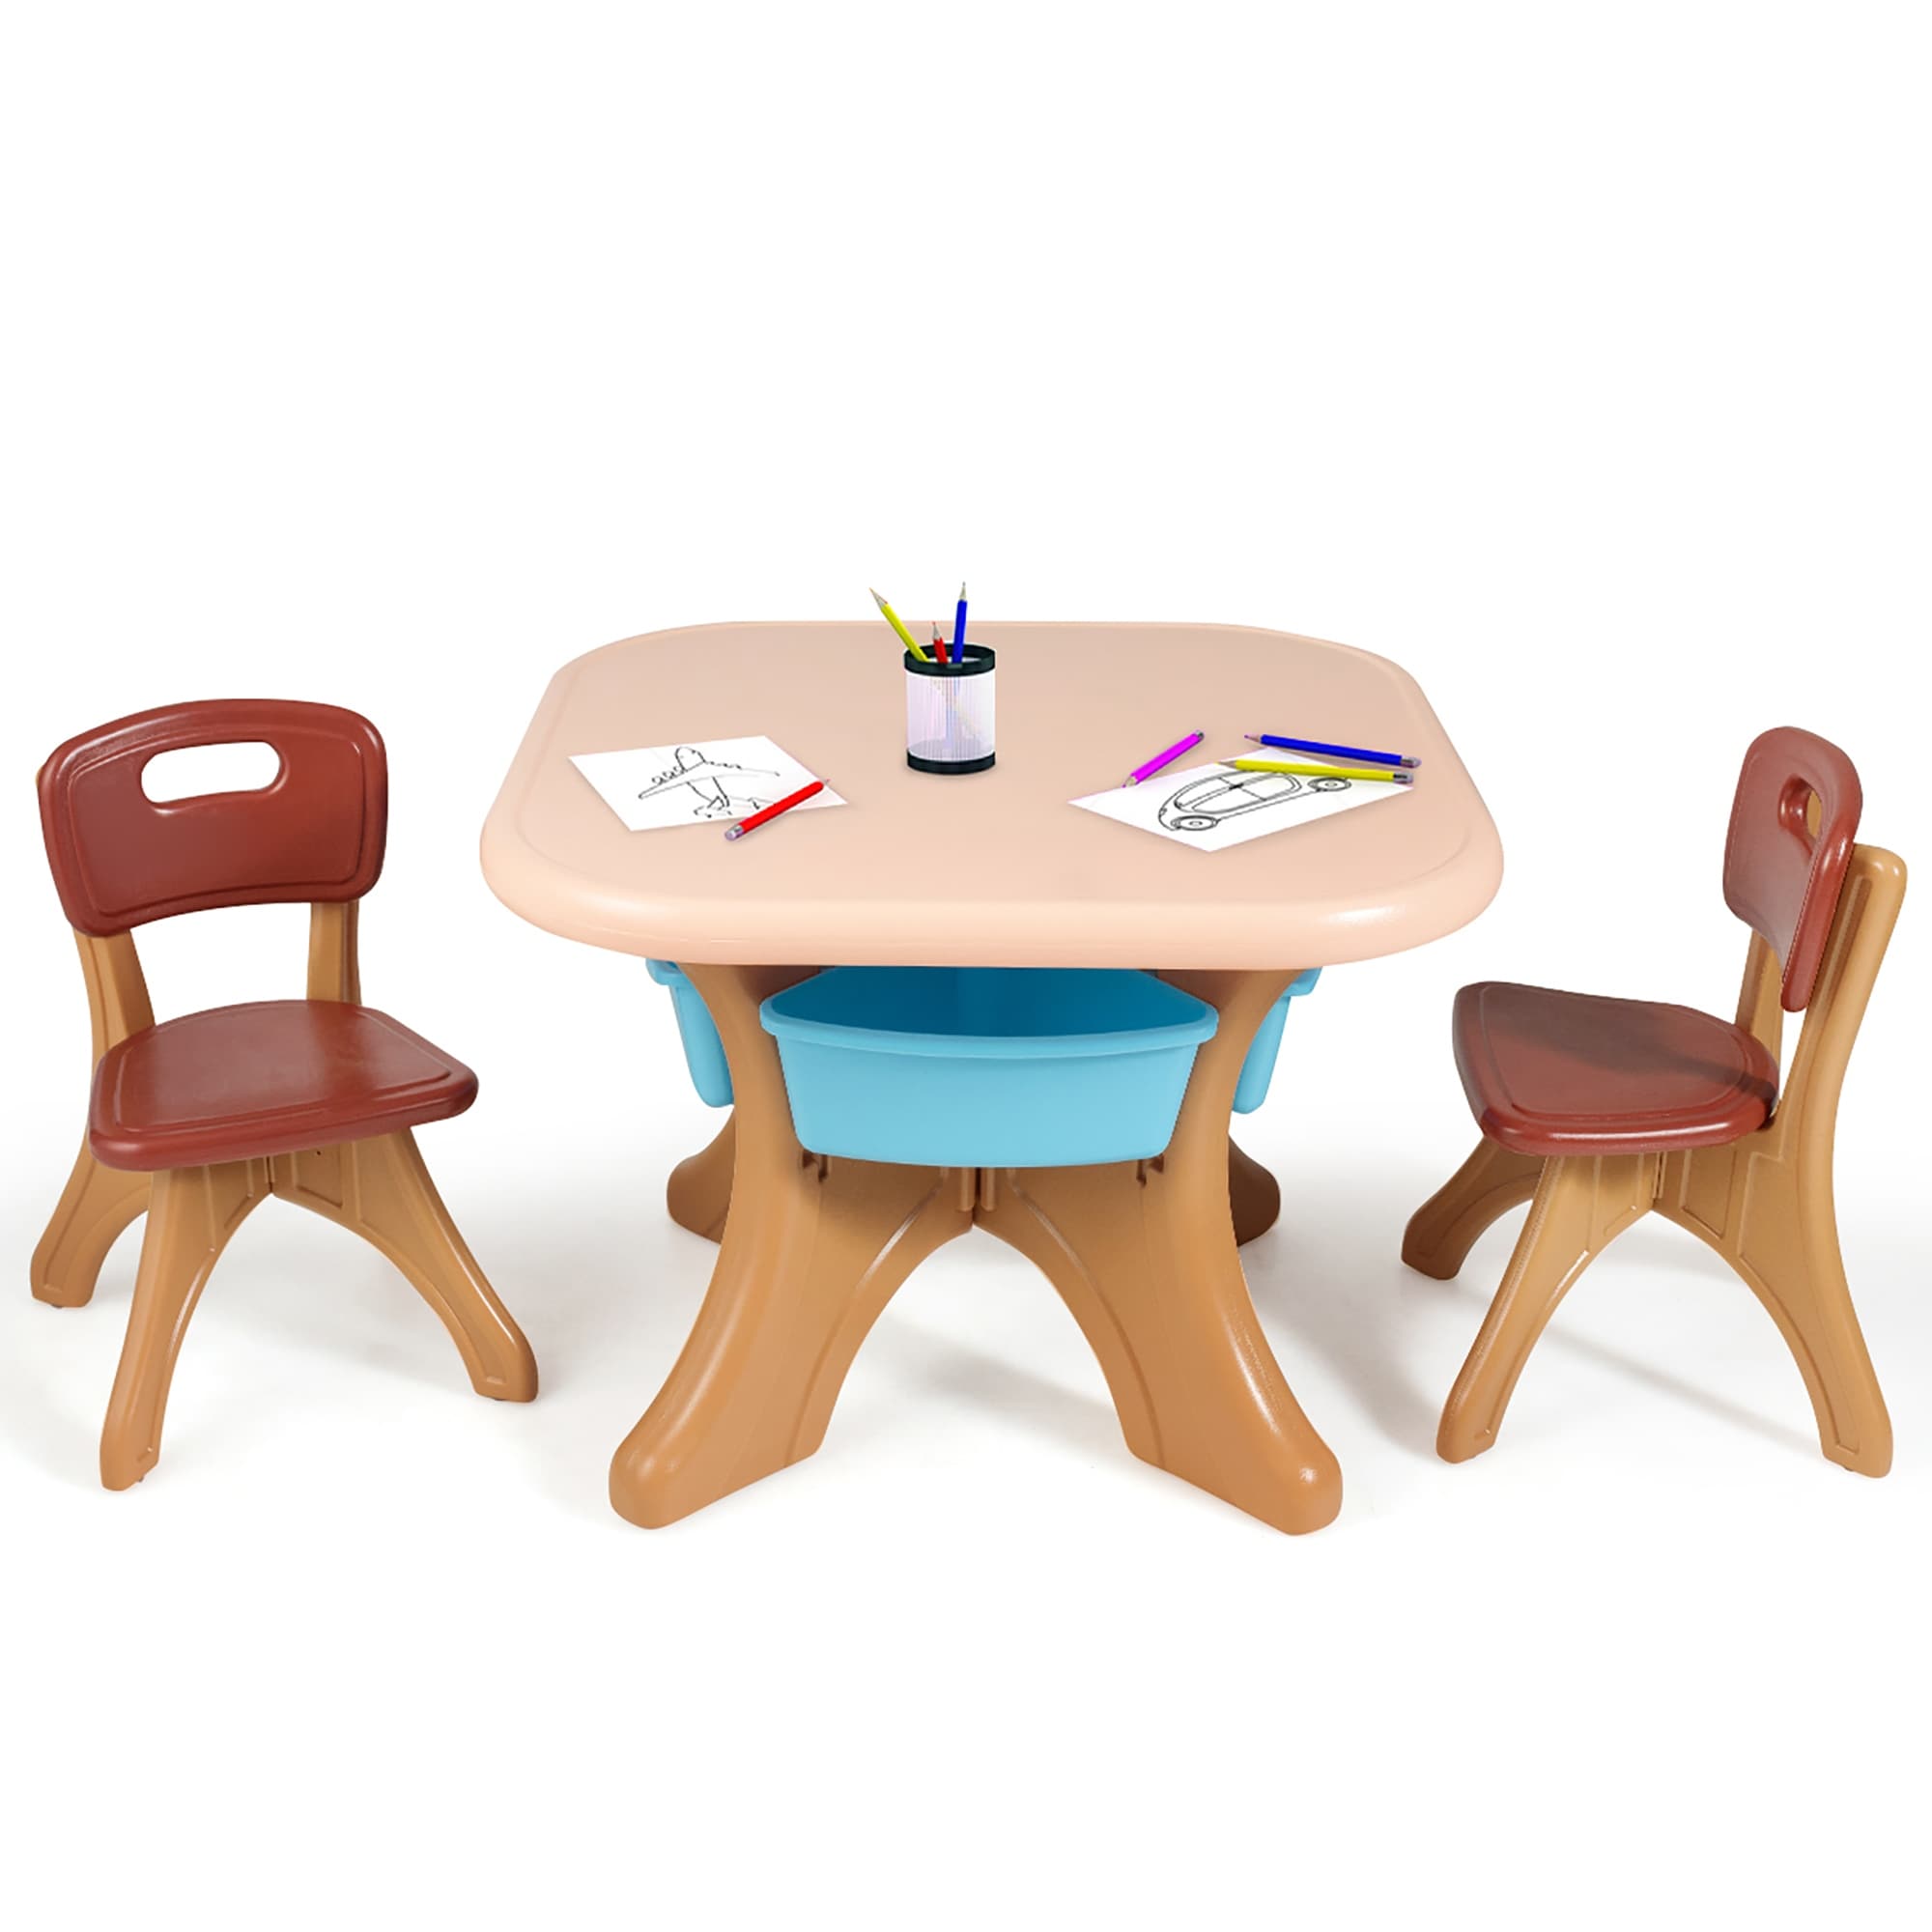 Gdlf Kids Art Table and 2 Chairs, Wooden Drawing Desk, Activity & Crafts, Children's Furniture, 42x23